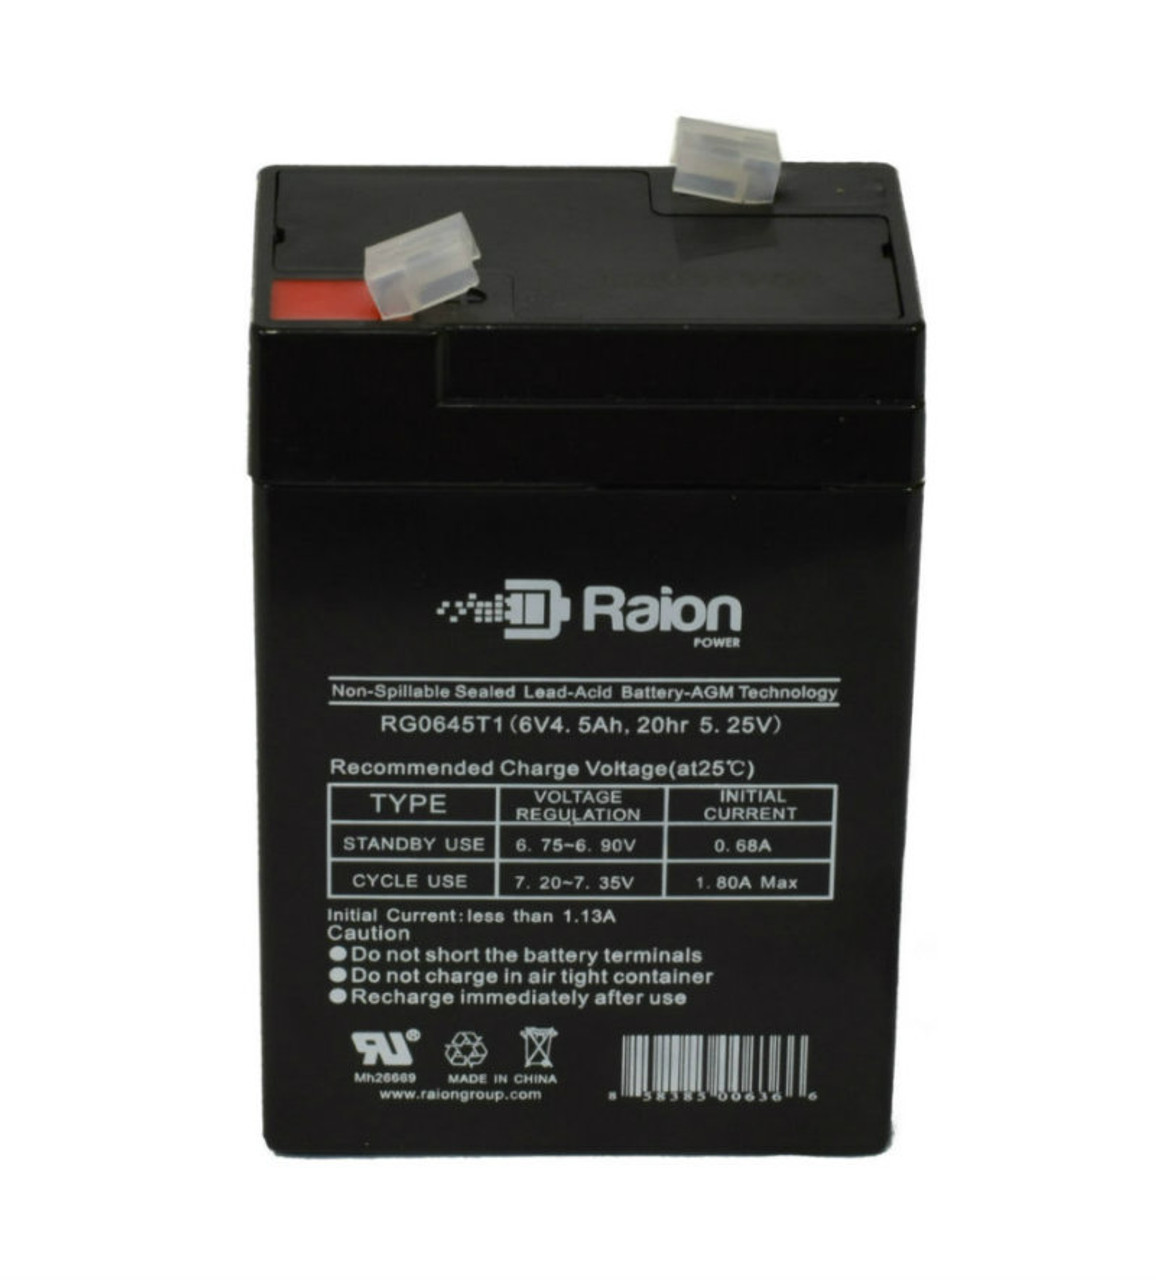 Raion Power RG0645T1 Replacement Battery Cartridge for Flying Power NS6-4.5A